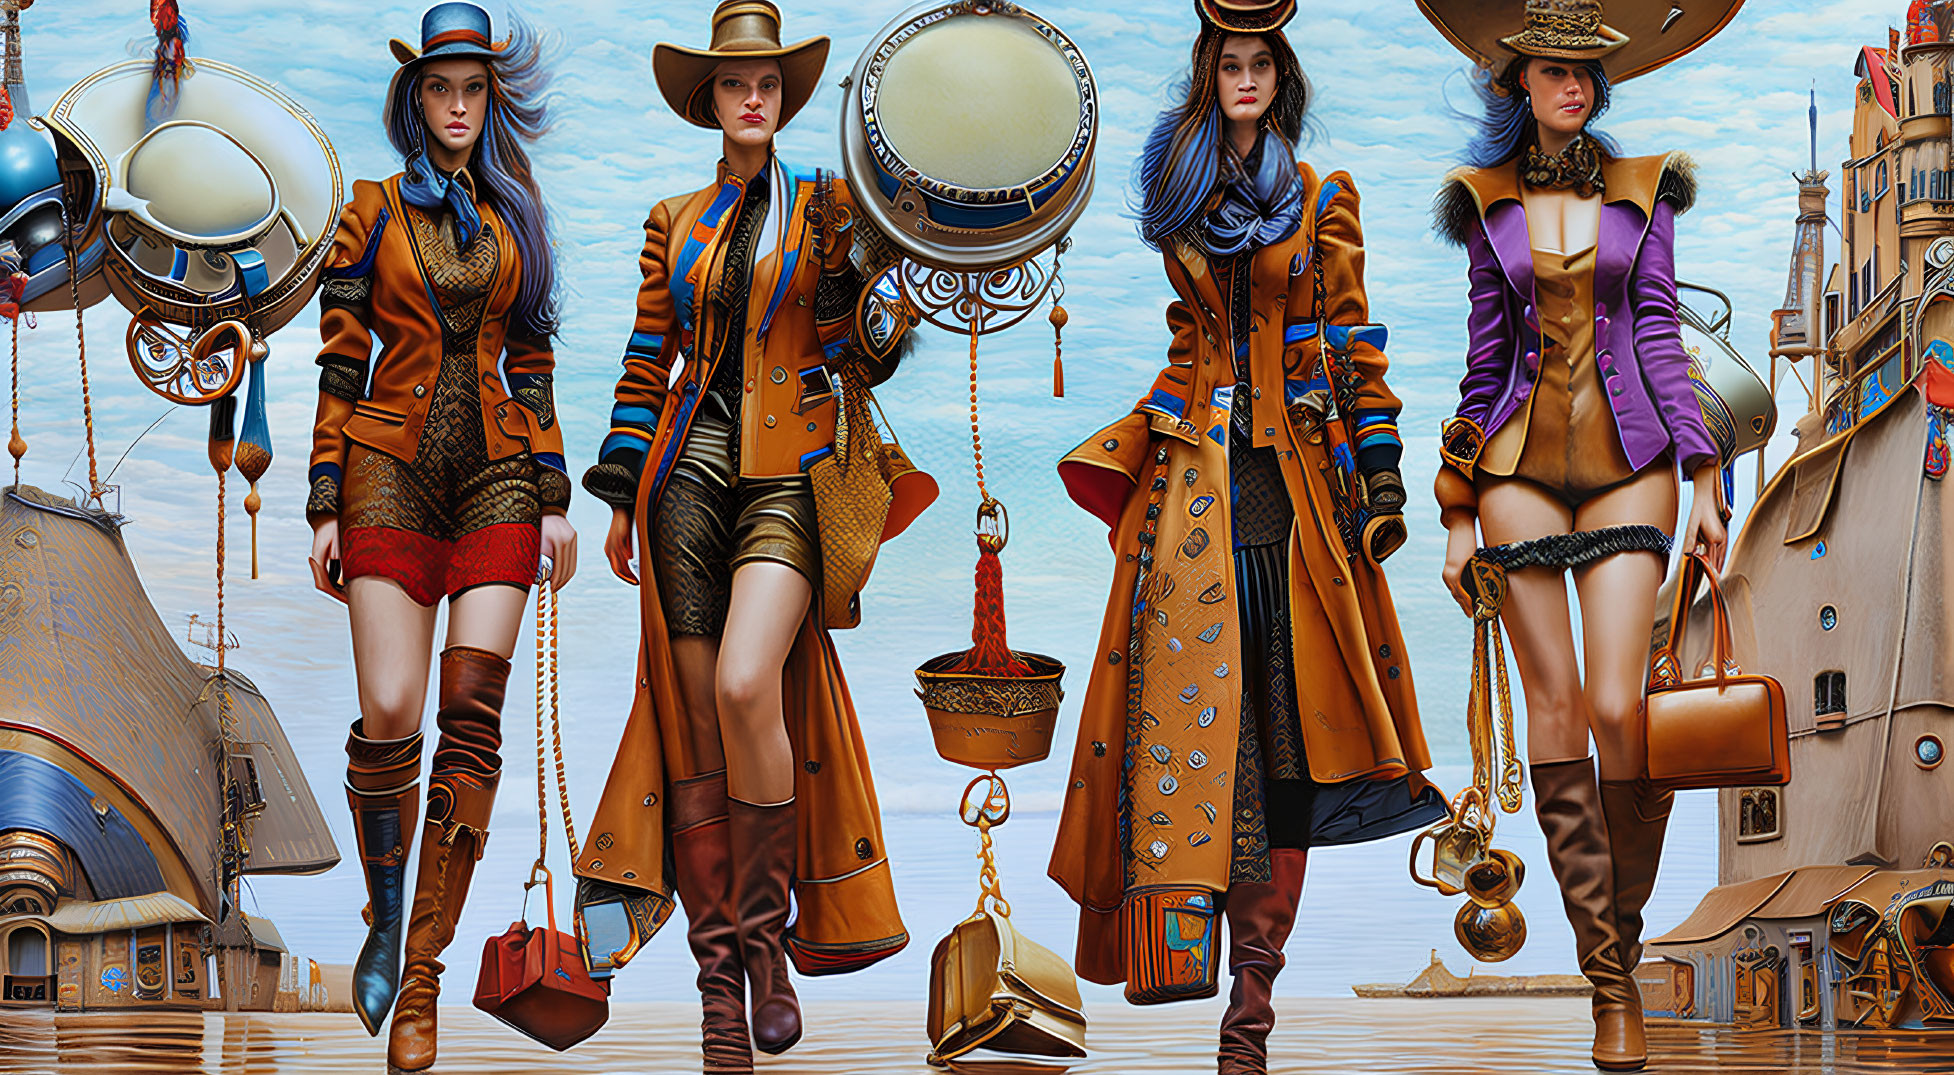 Stylized steampunk women with airships and gears in background